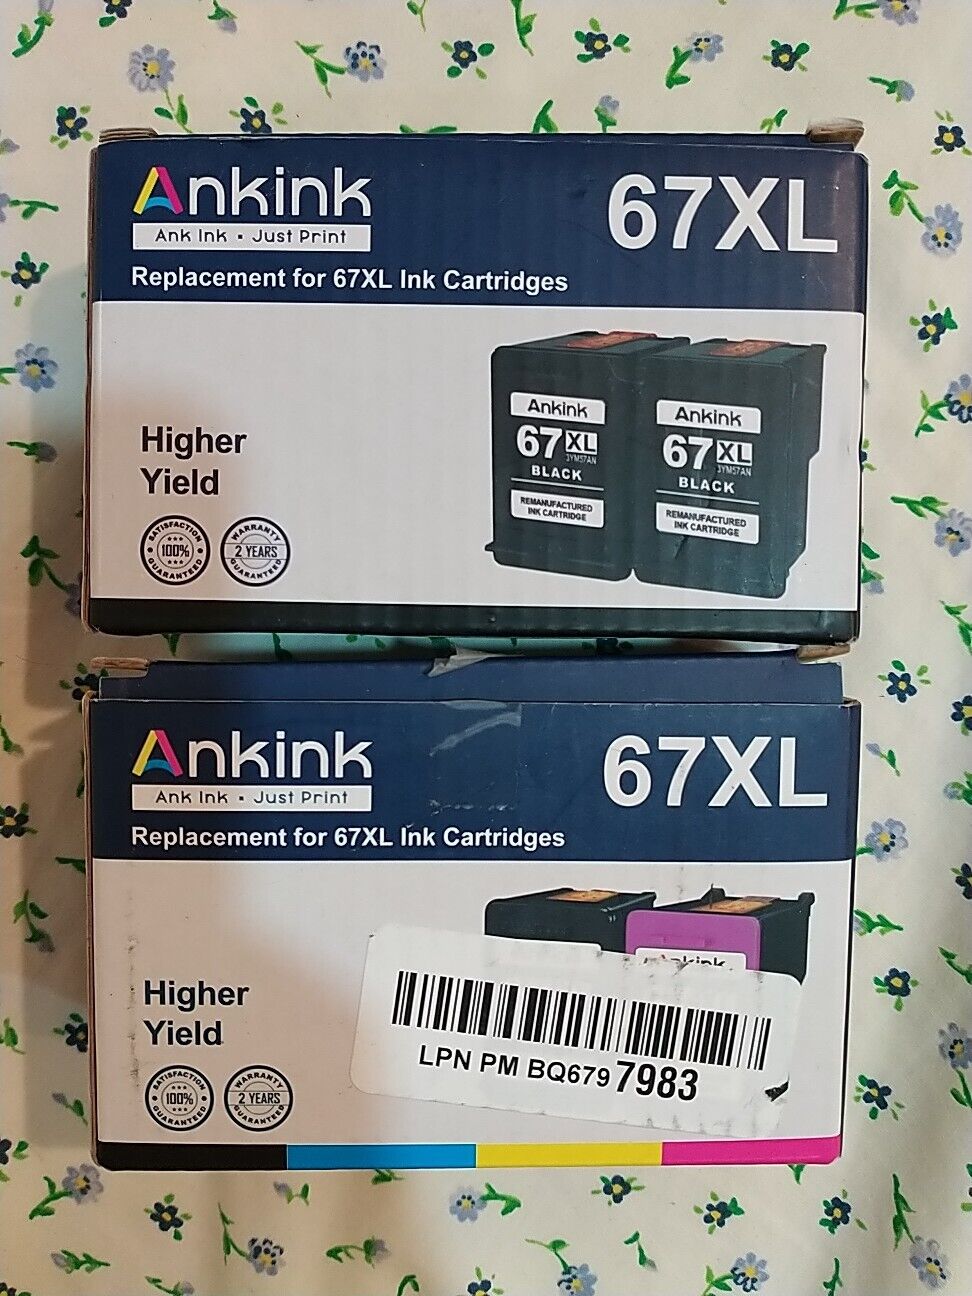 Ankink 67XL Replacement Ink Cartridges - 3 Black And 1 Tricolor See